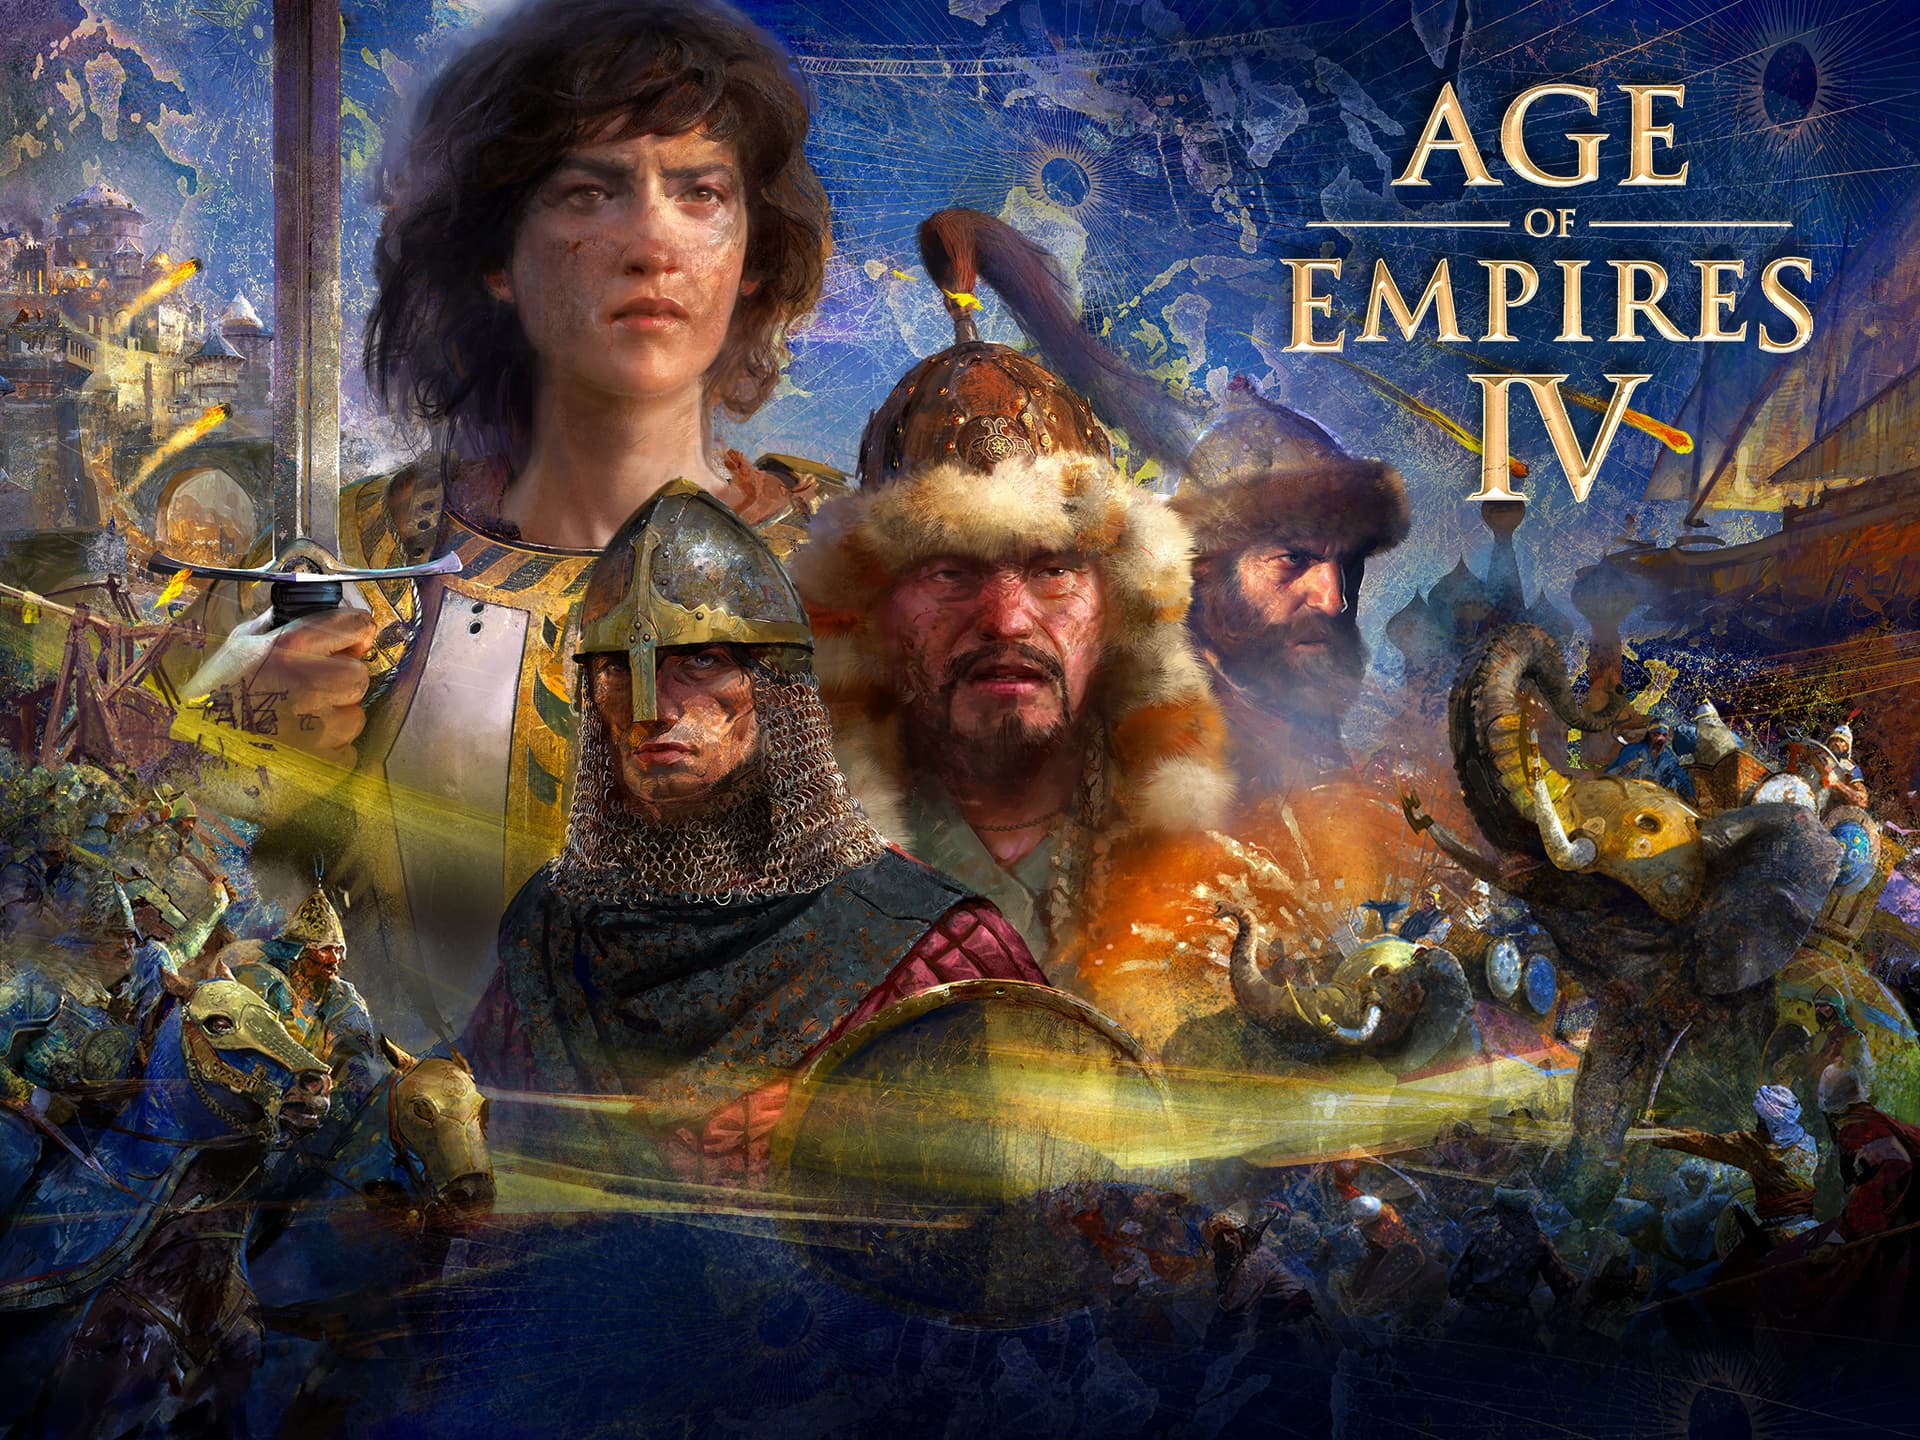 Age of Empires IV Wallpapers